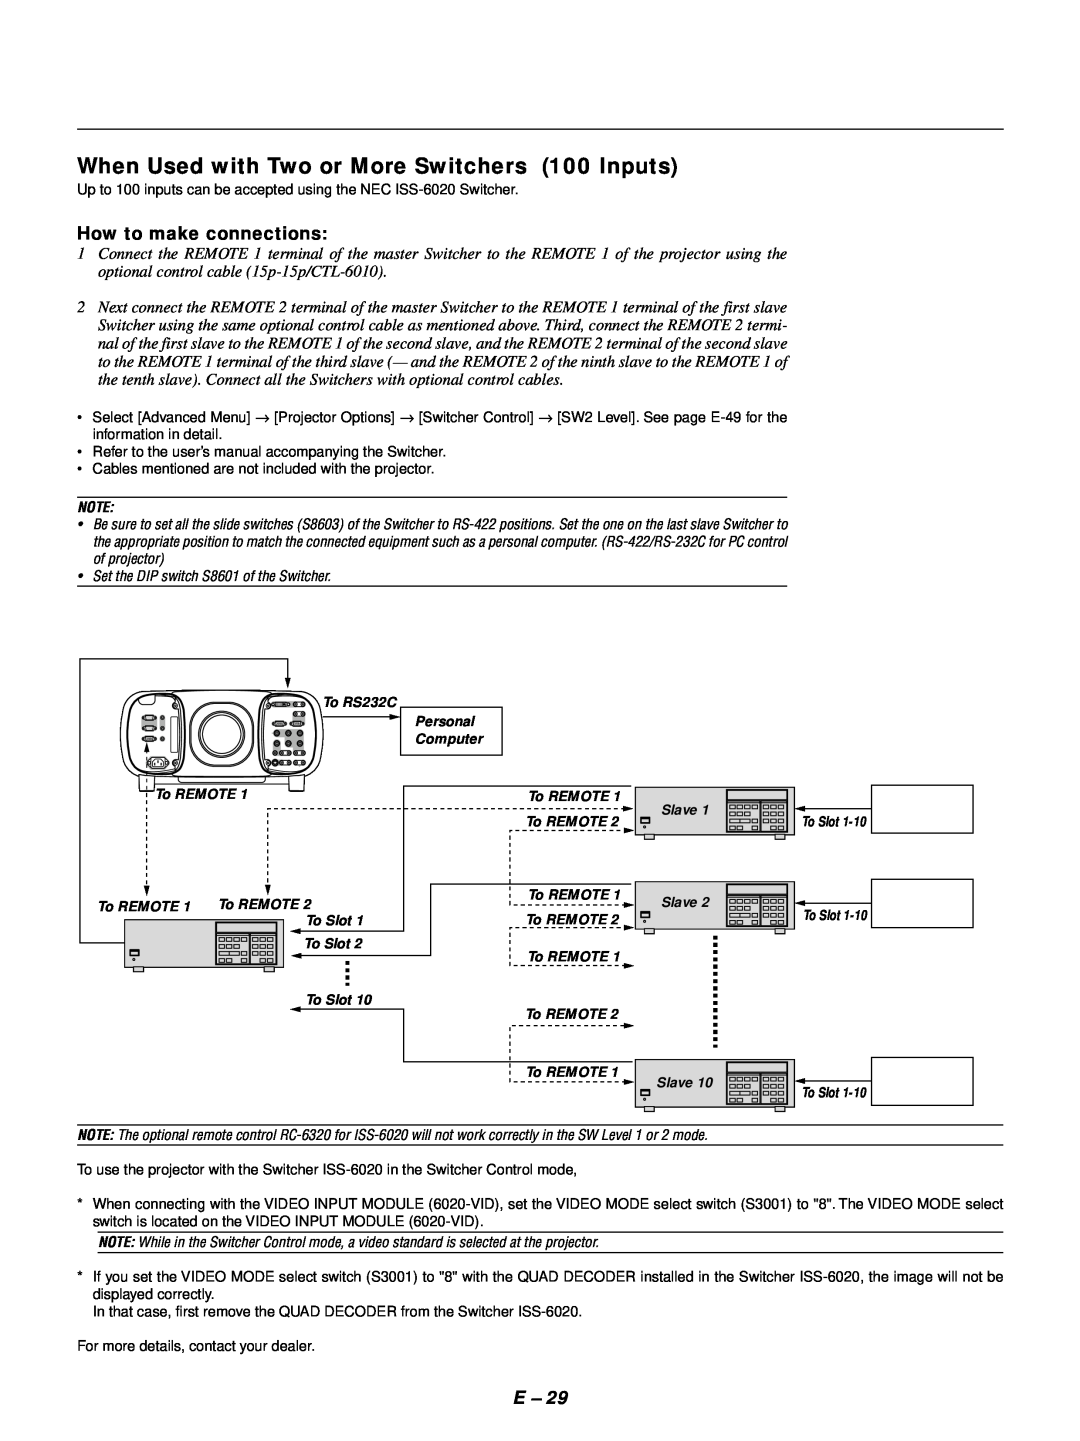 NEC GT1150 user manual When Used with Two or More Switchers 100 Inputs, How to make connections 